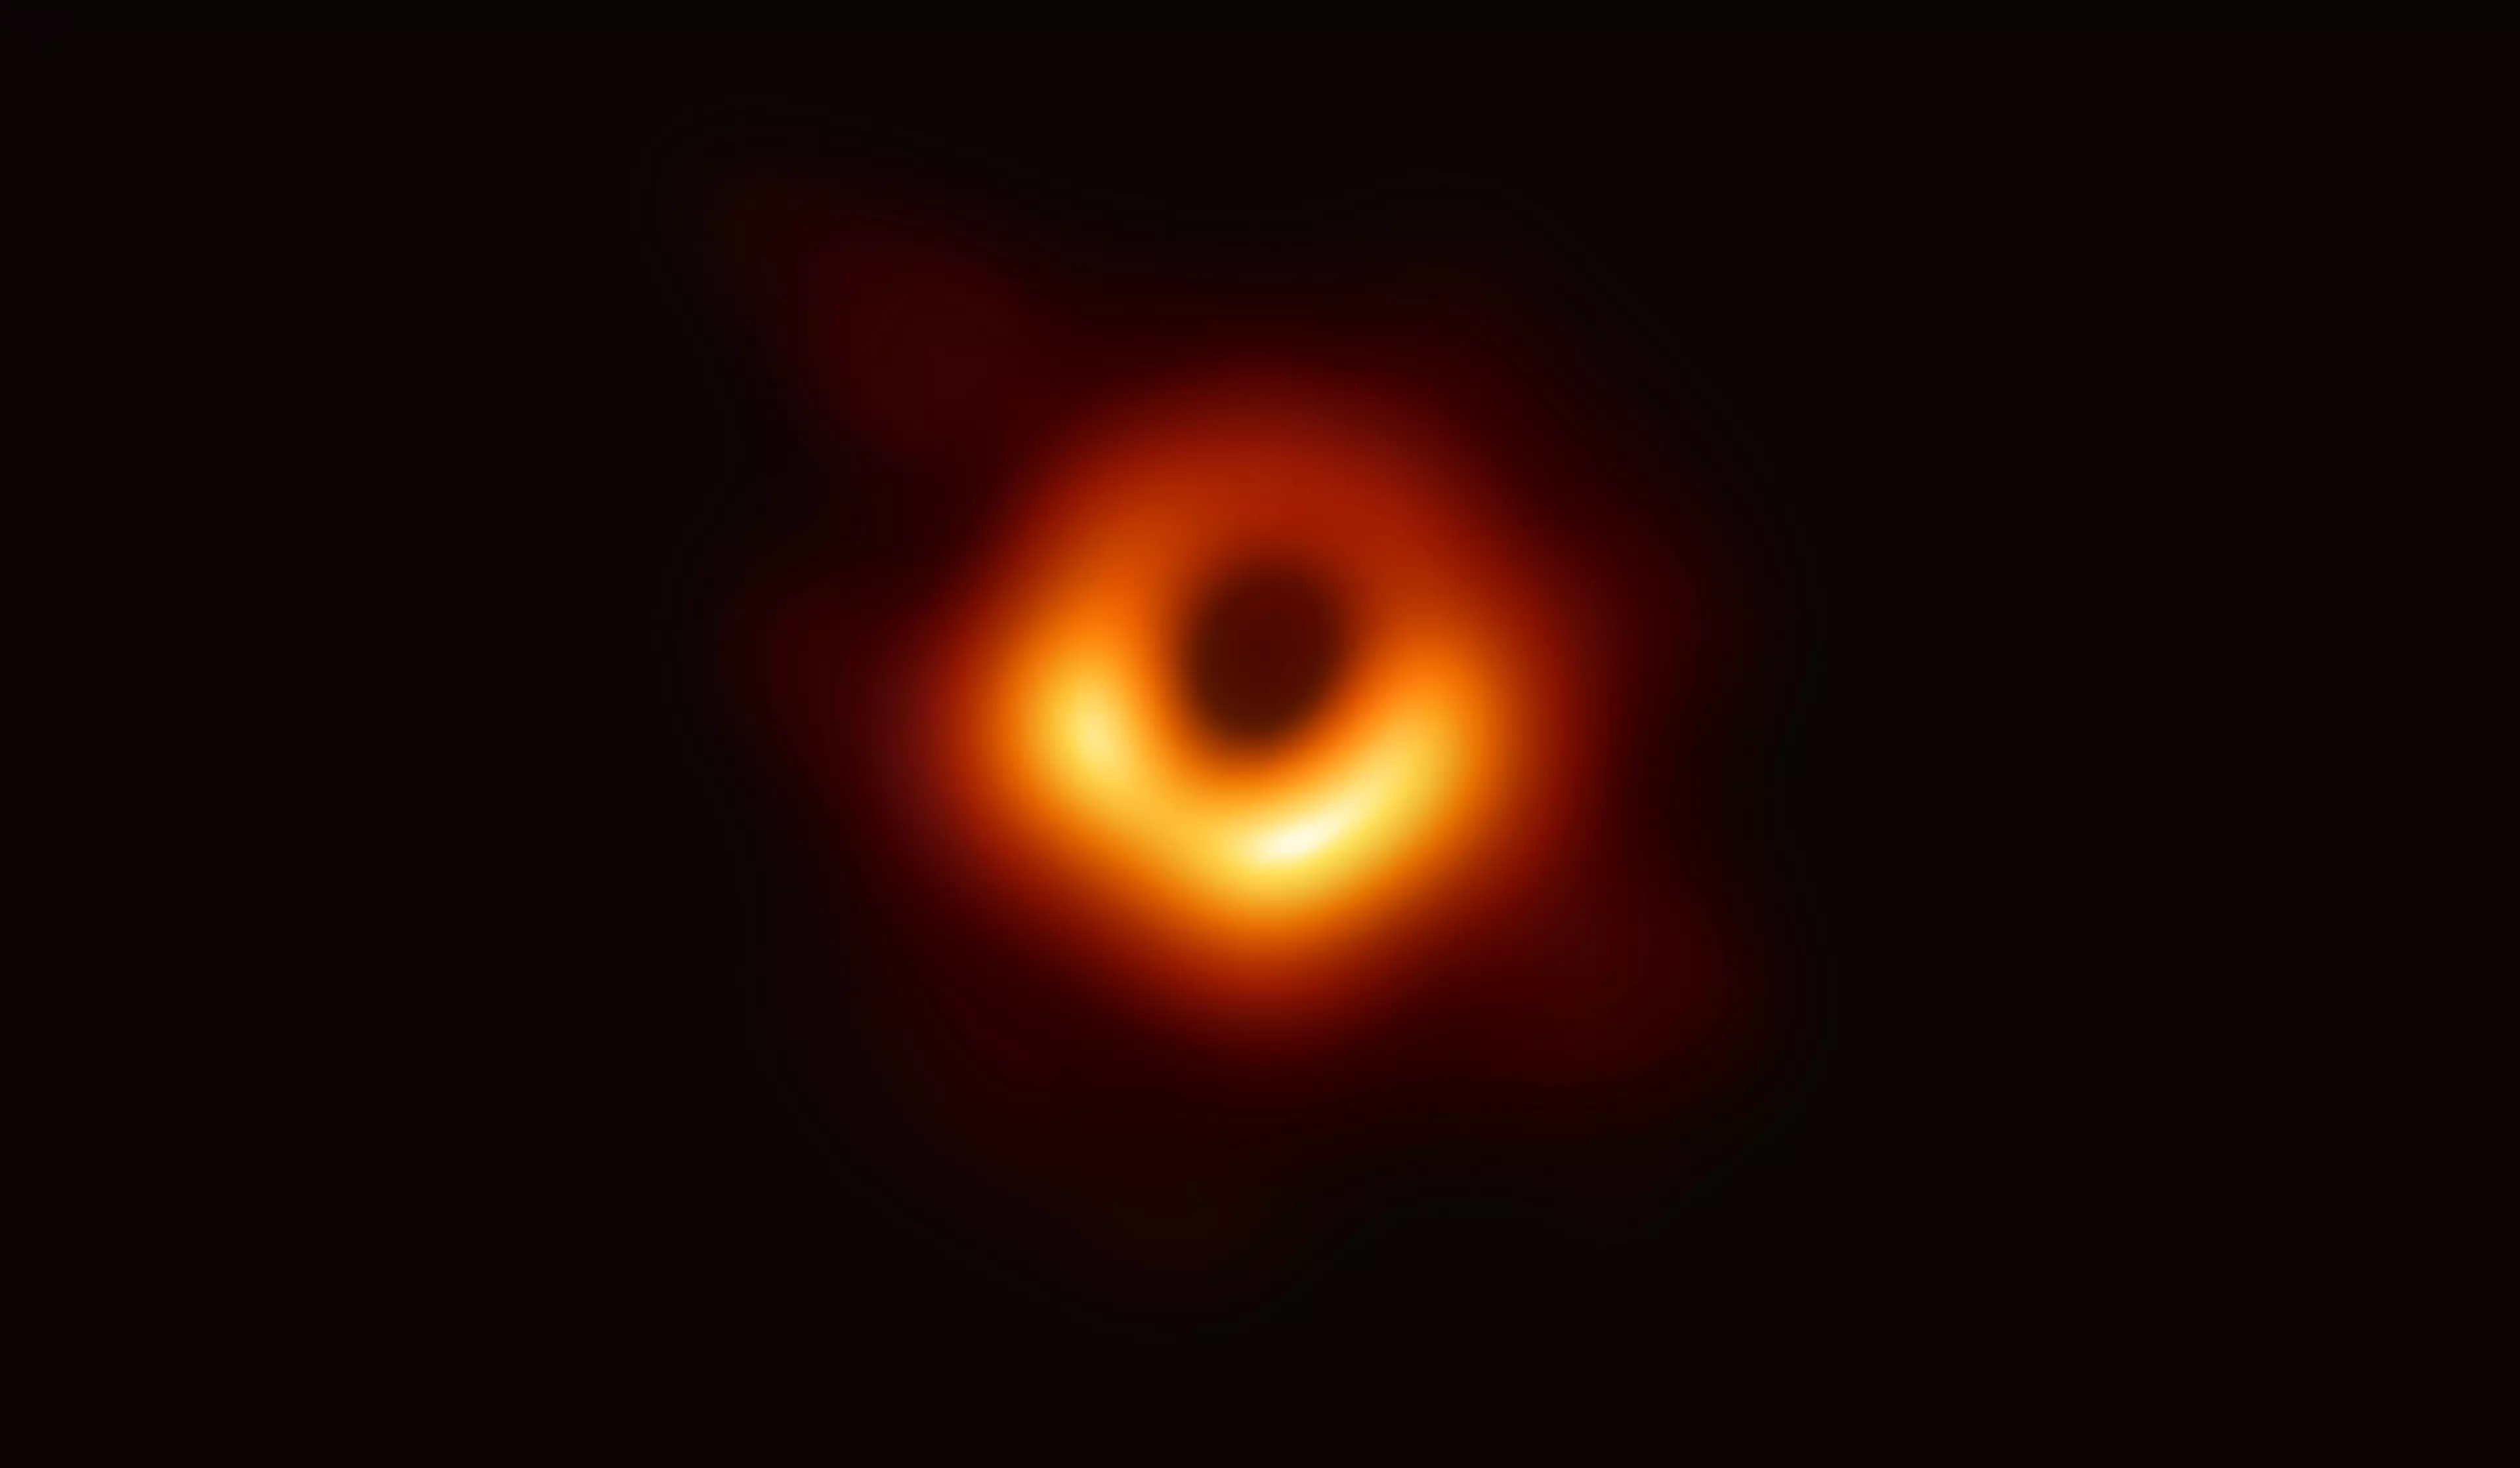 Here's another black hole, discovered last year.